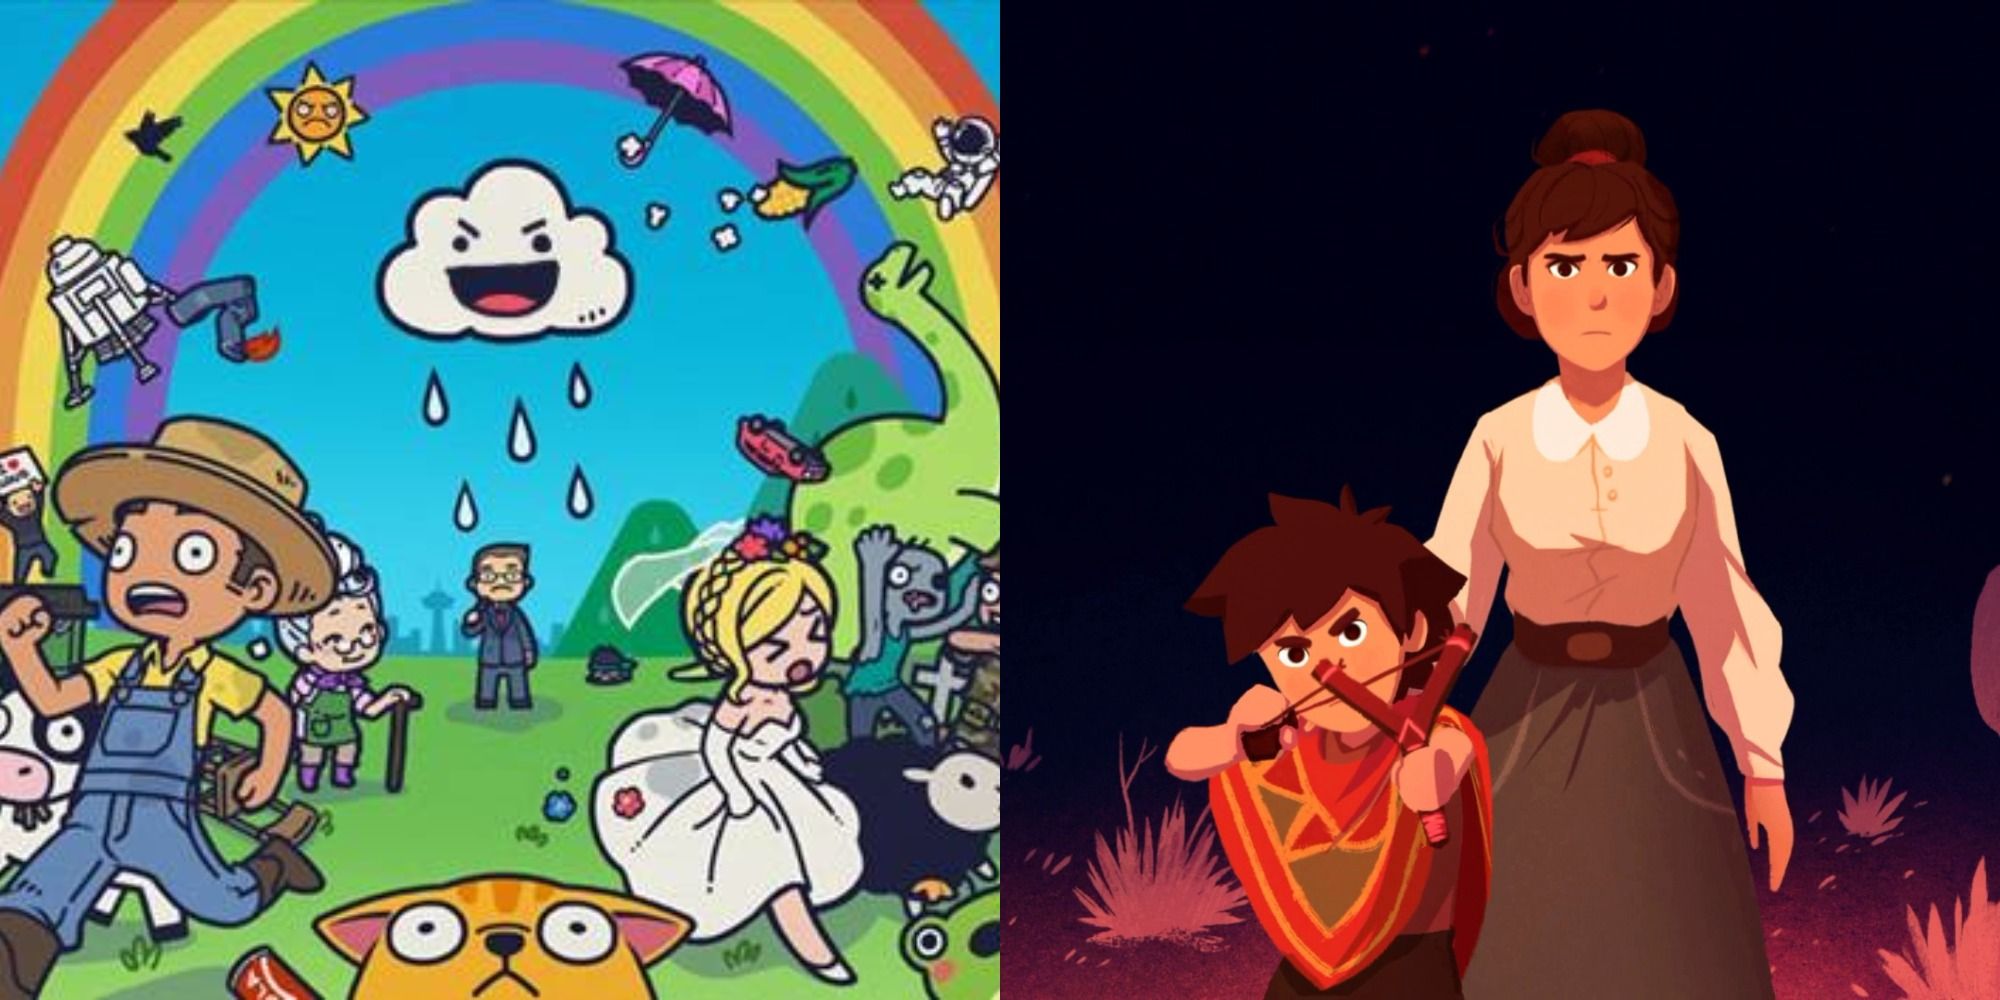 10 Most Underrated Indie Games In 2021 (So Far)